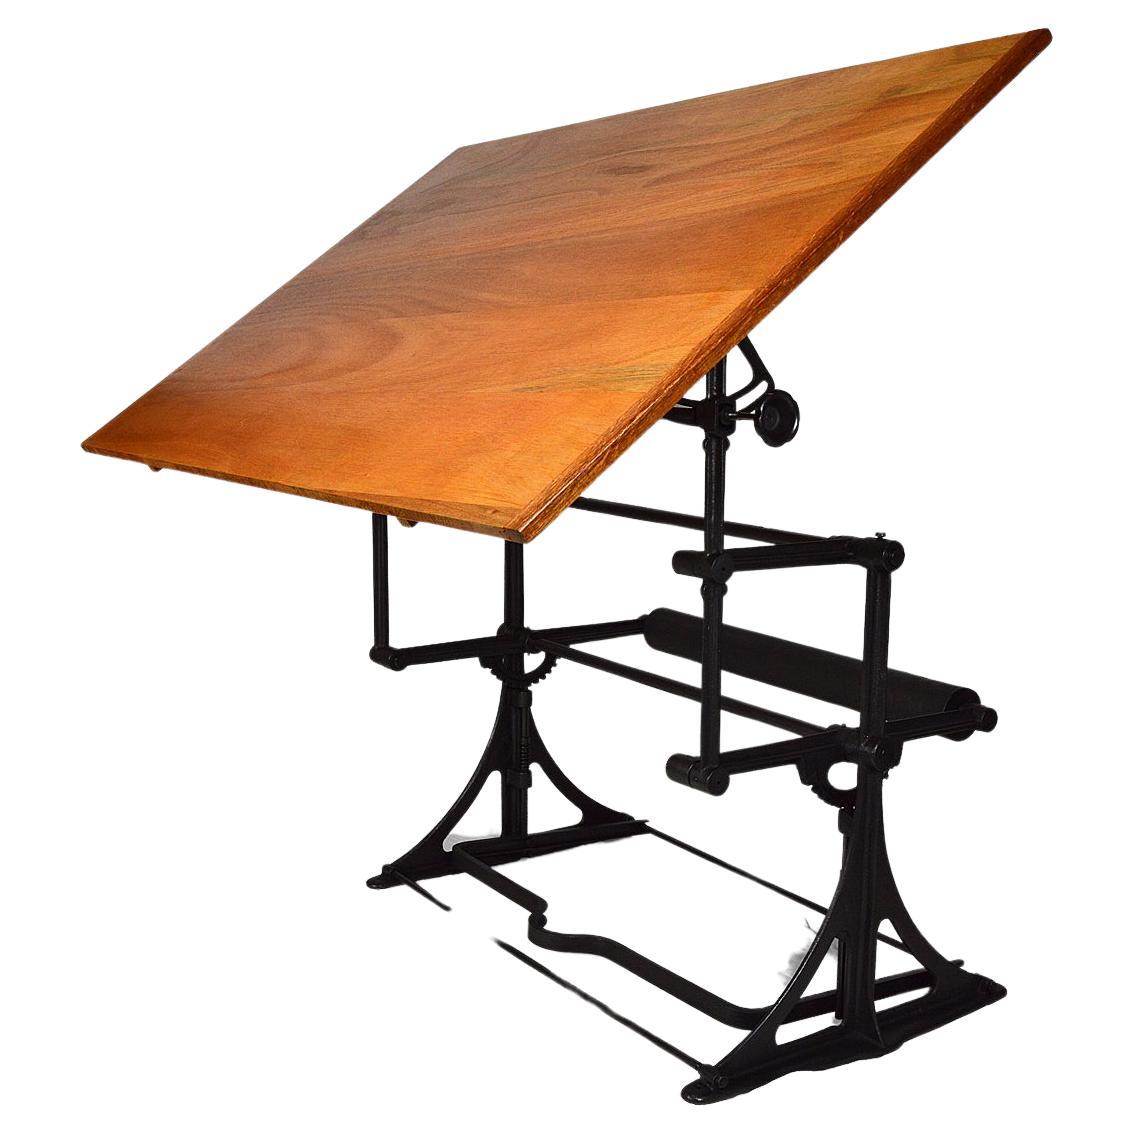 Large Adjustable Industrial Drafting / Architect Table, France, circa 1900